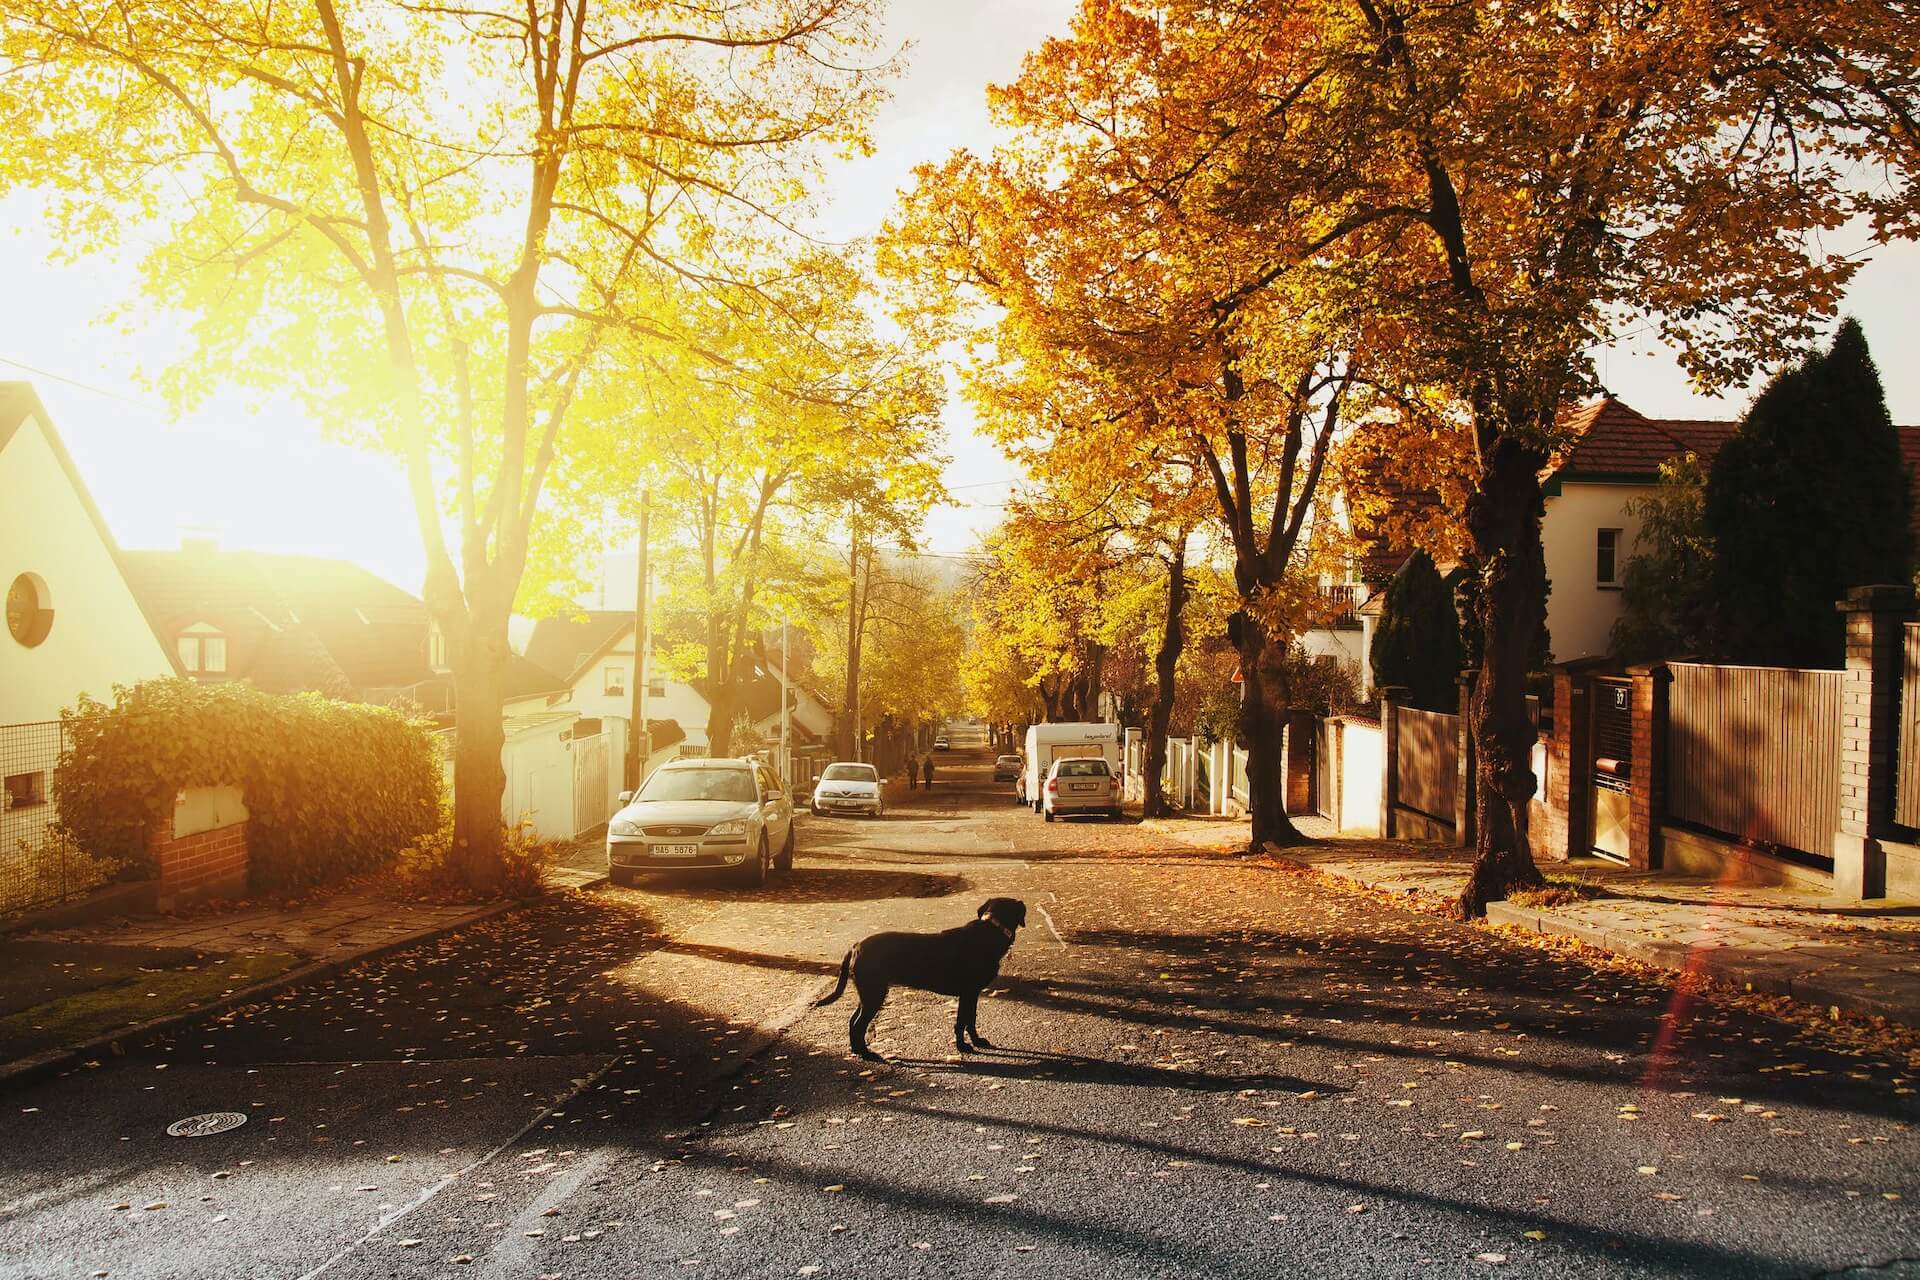 A dog standing on a street